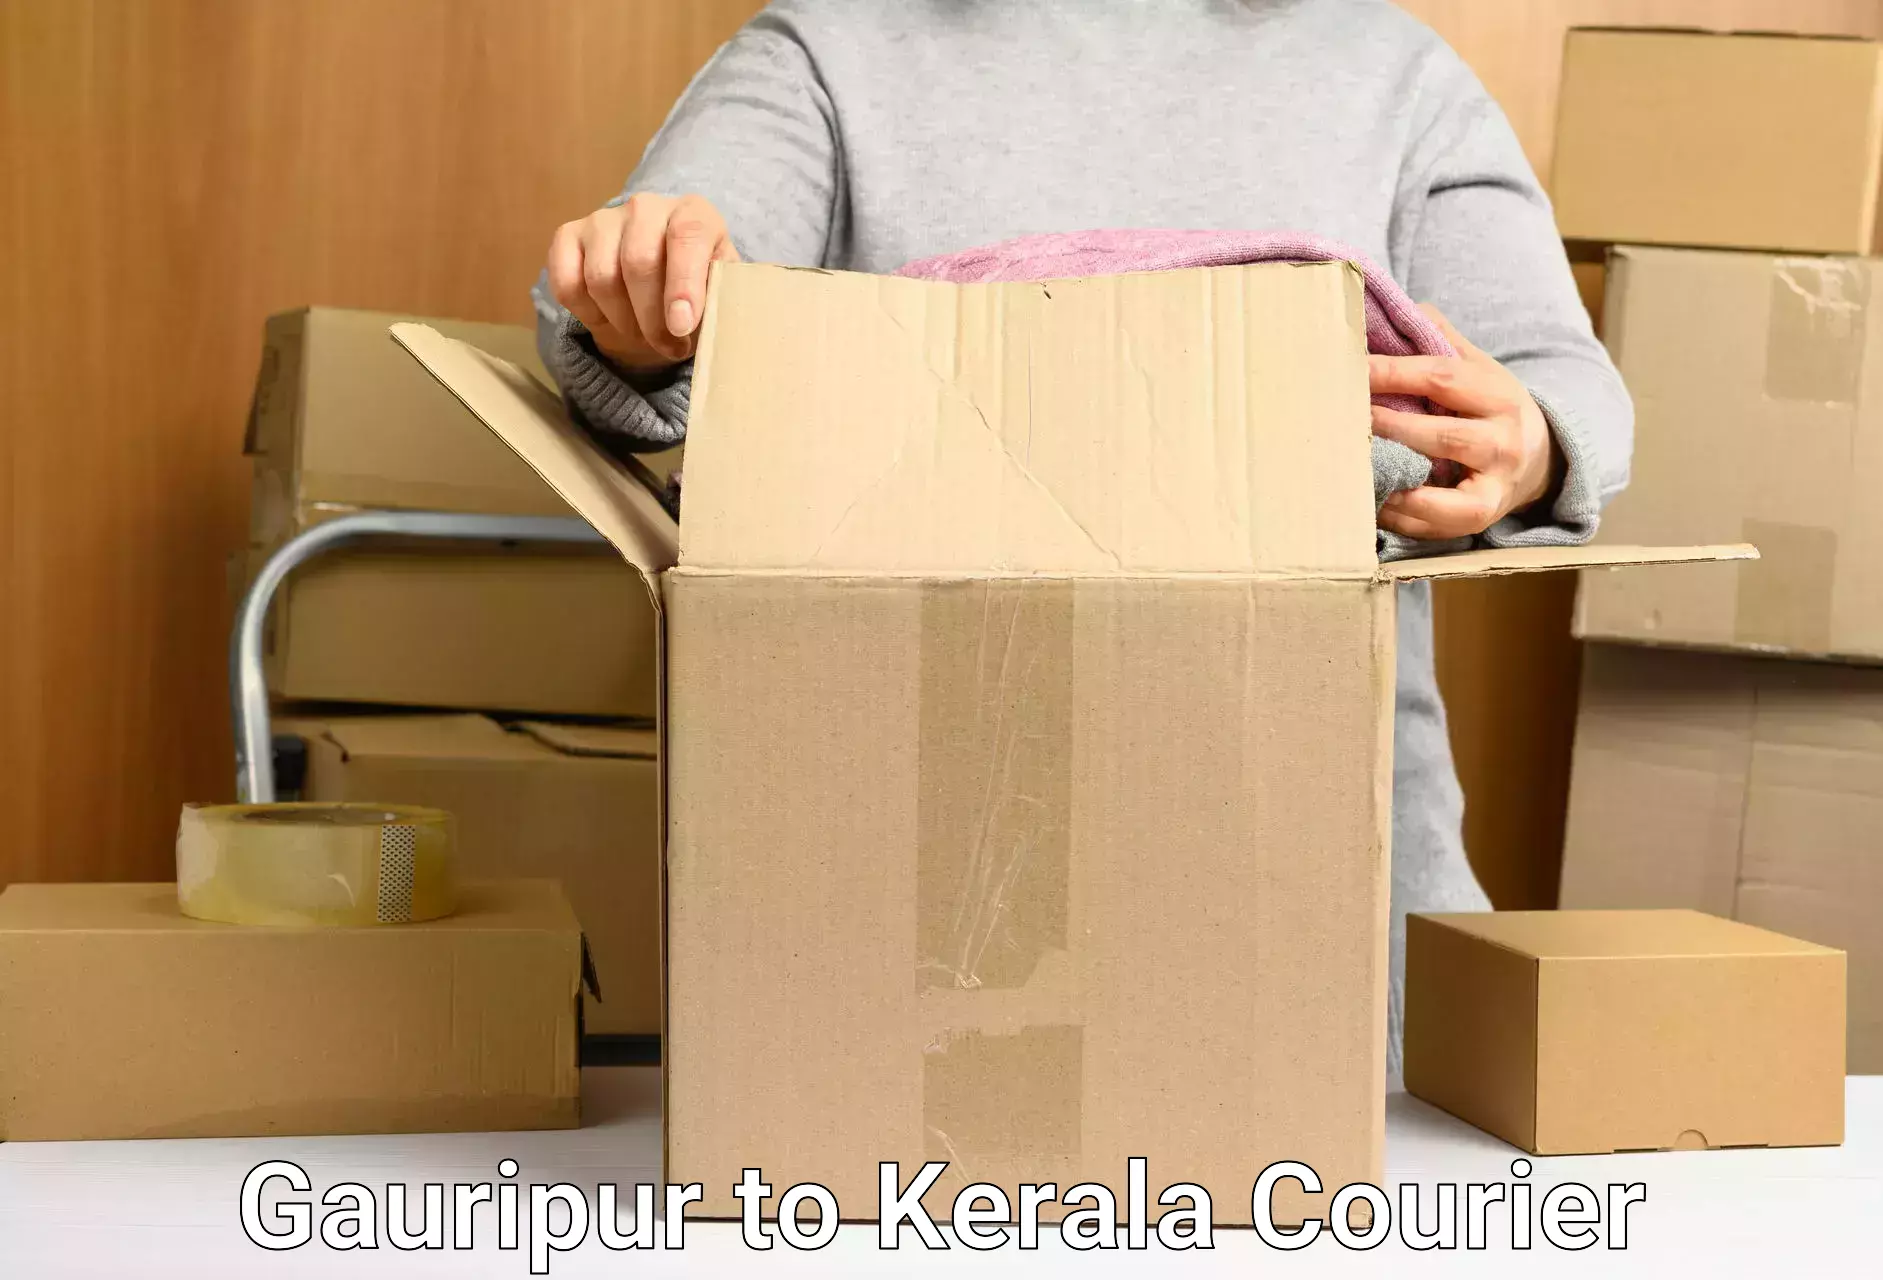 Reliable delivery network Gauripur to Kerala